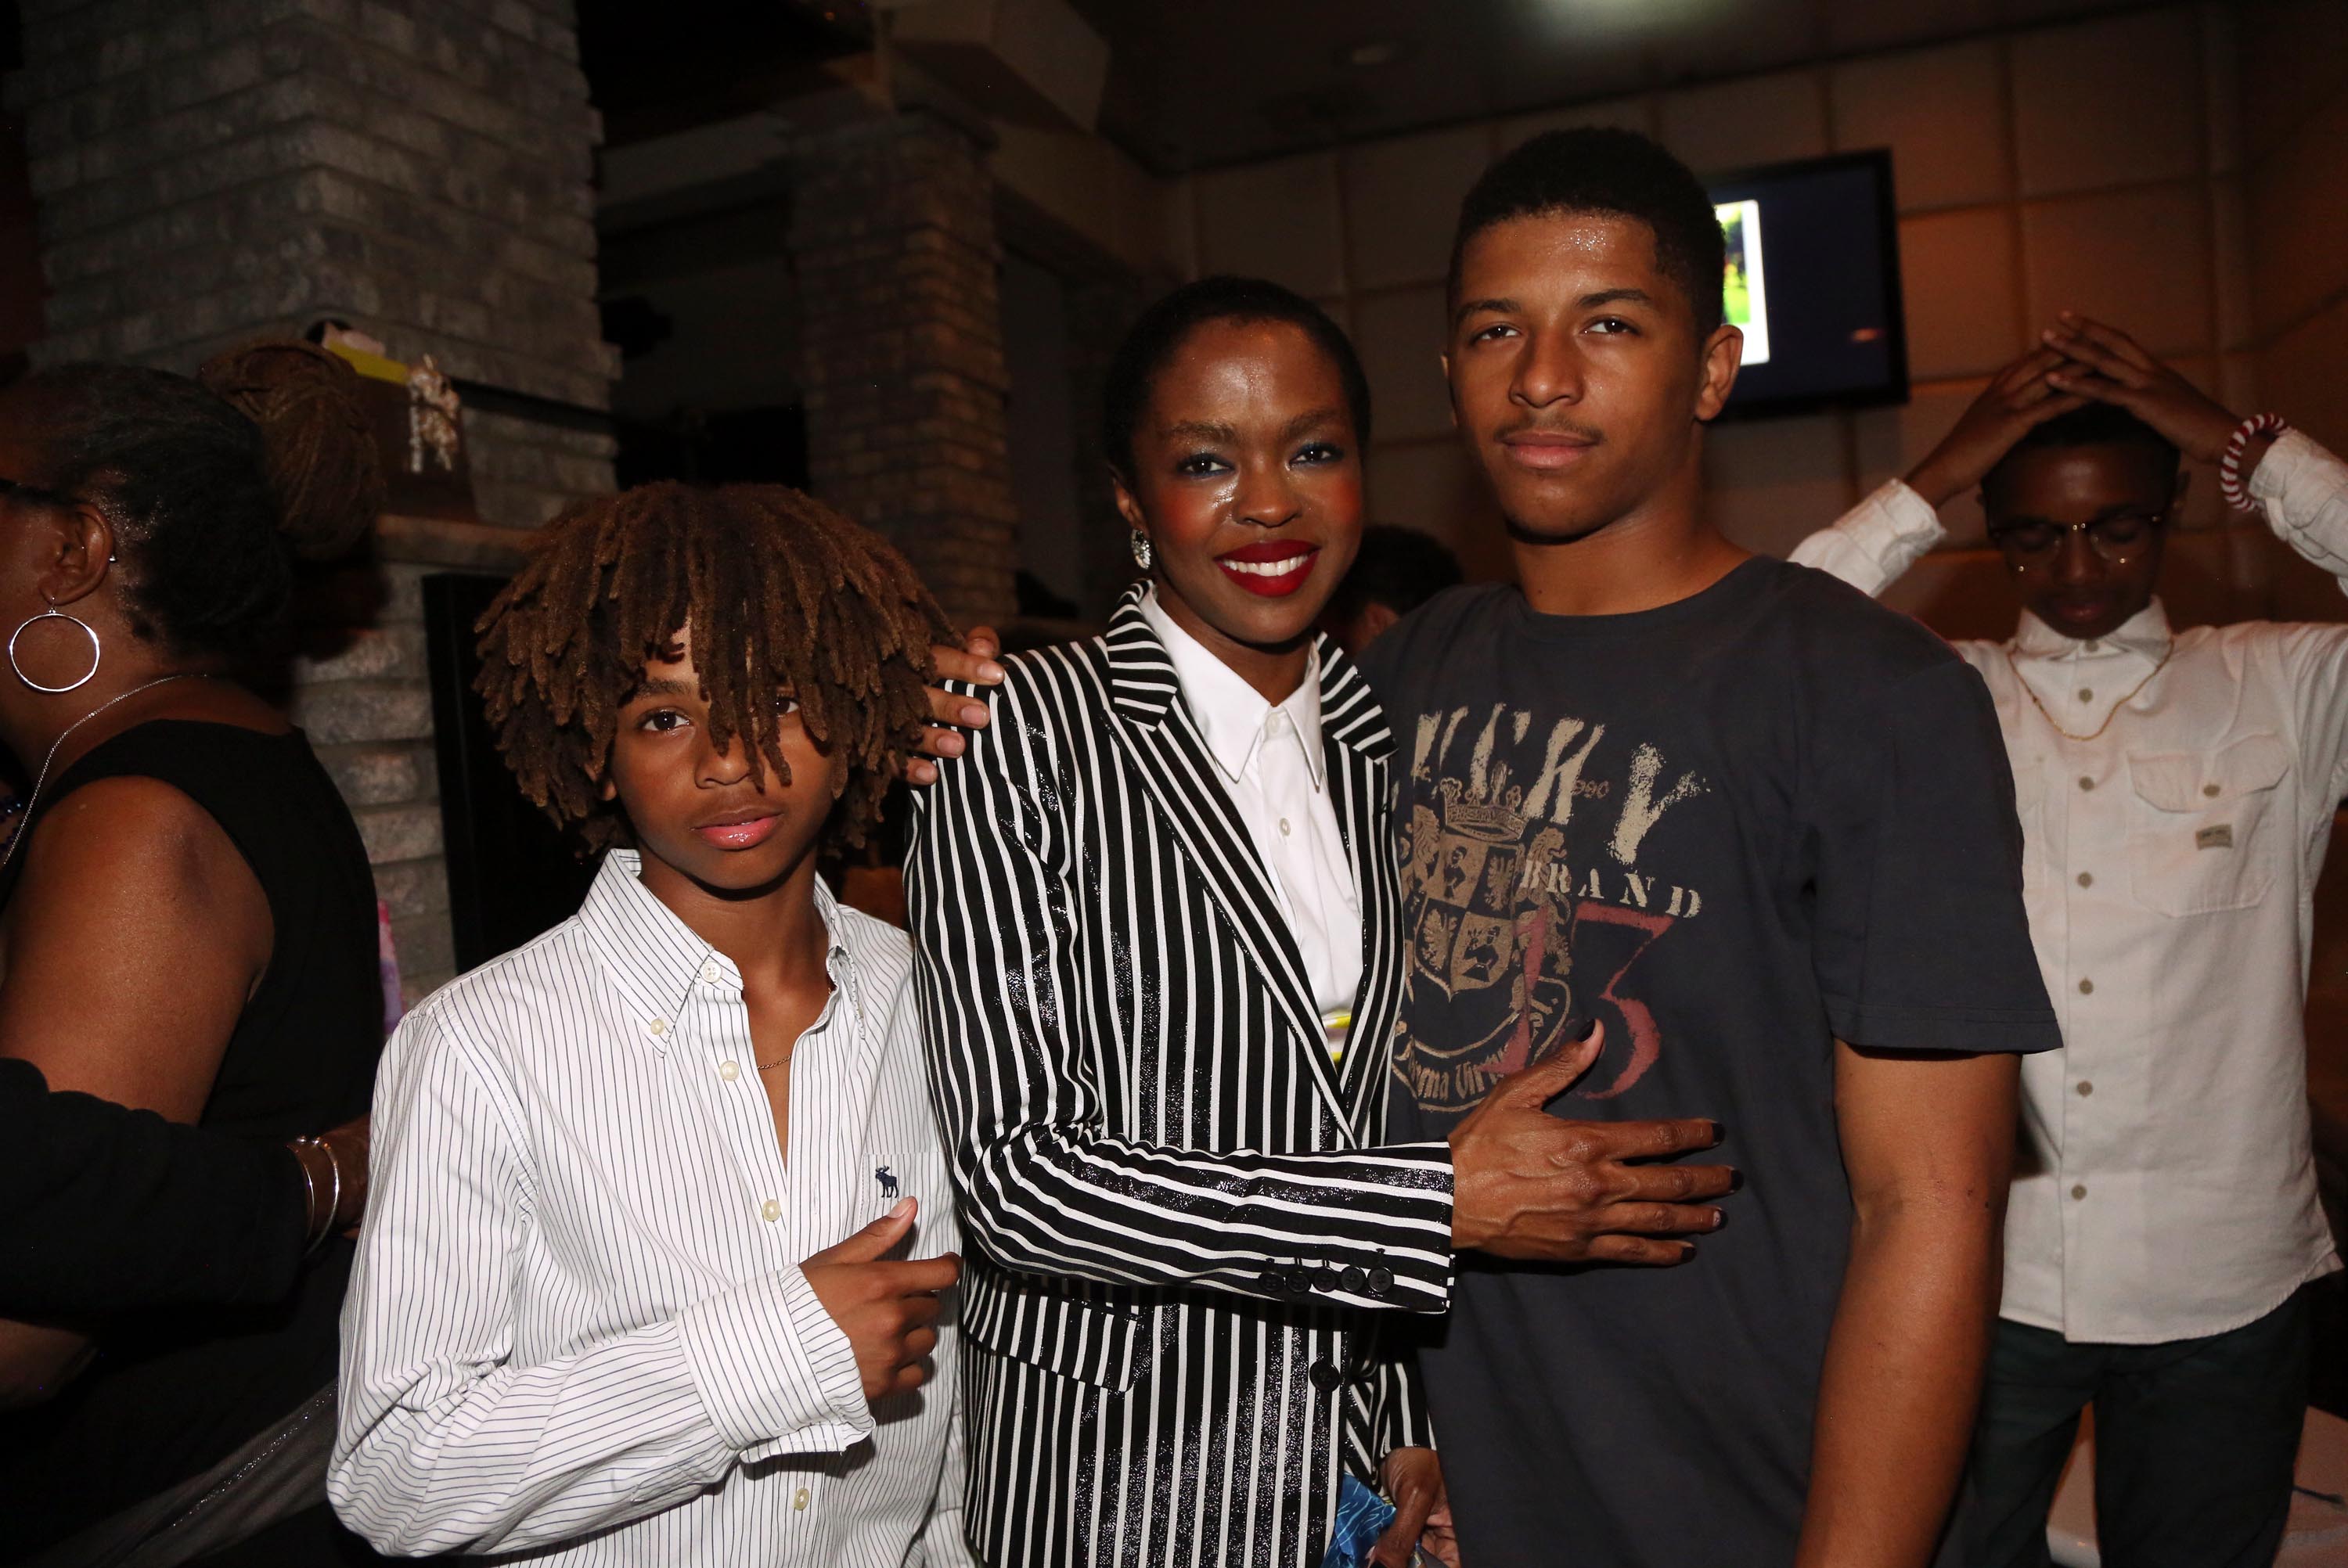 Lauryn Hill (C) with her sons John Marley (L) and Zion Marley (R) at The Ballroom on May 26, 2015, in West Orange, New Jersey. | Source: Getty Images